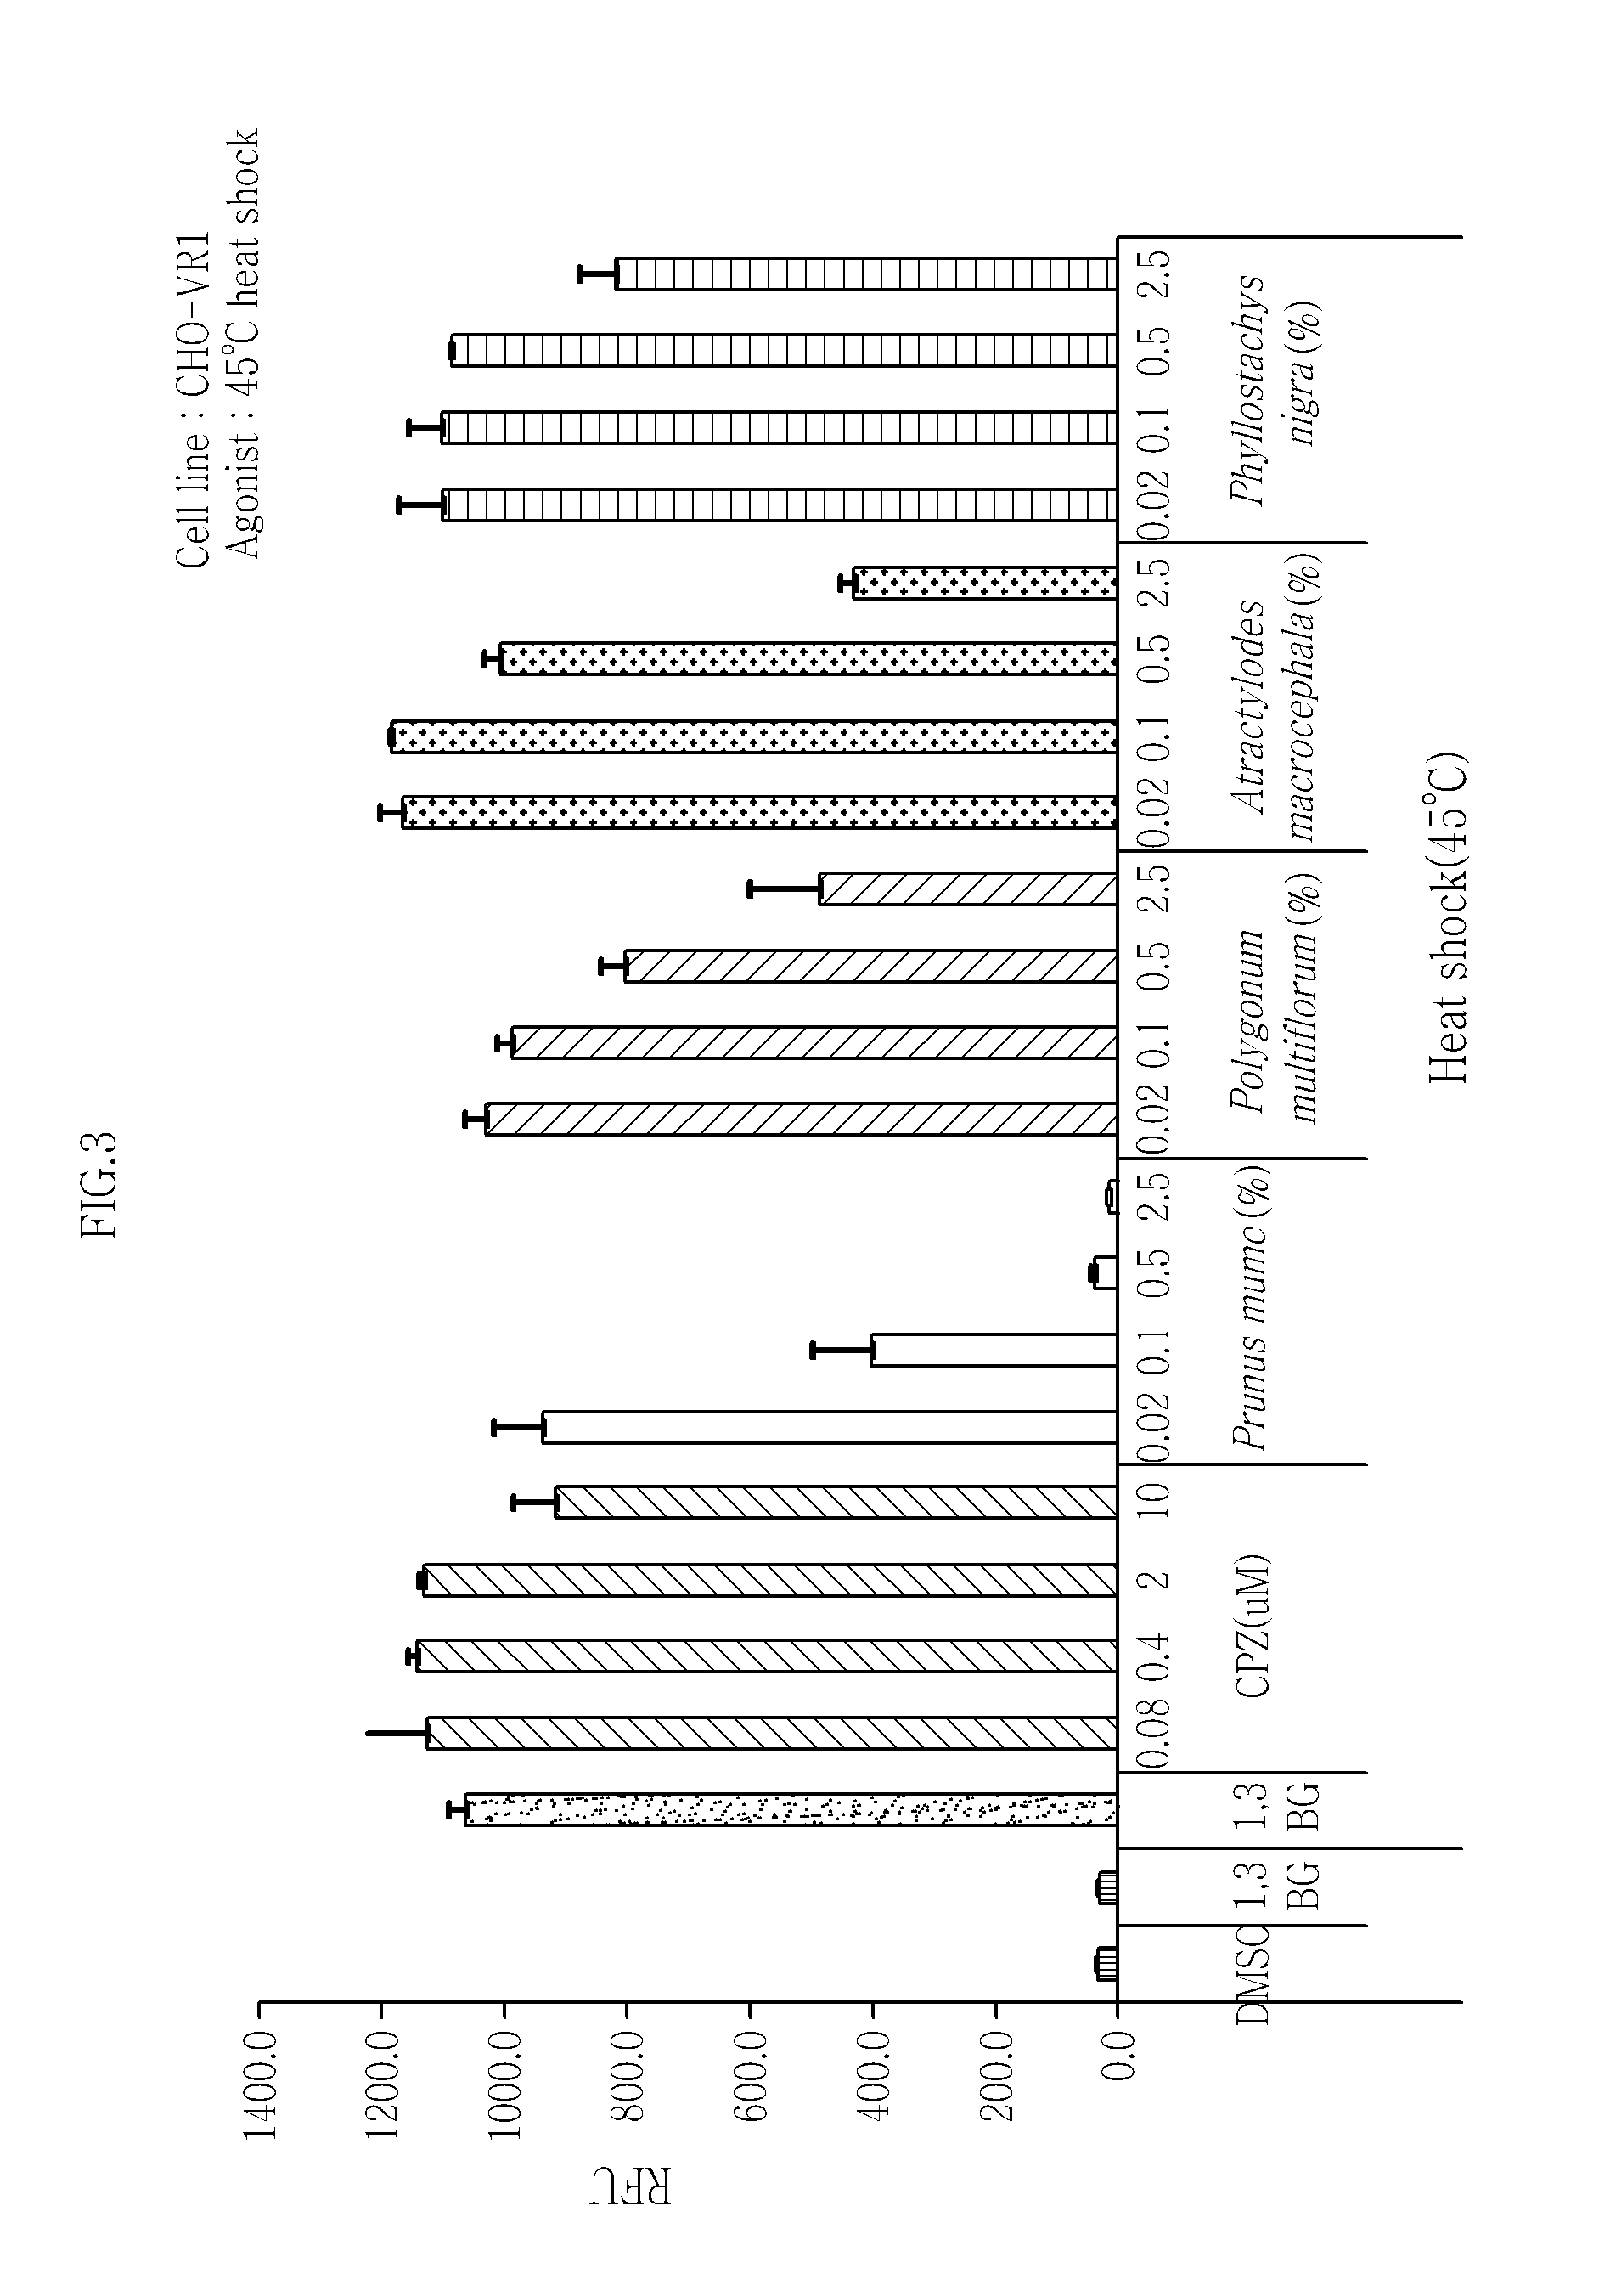 Composition containing prunus mume extract for external application to skin